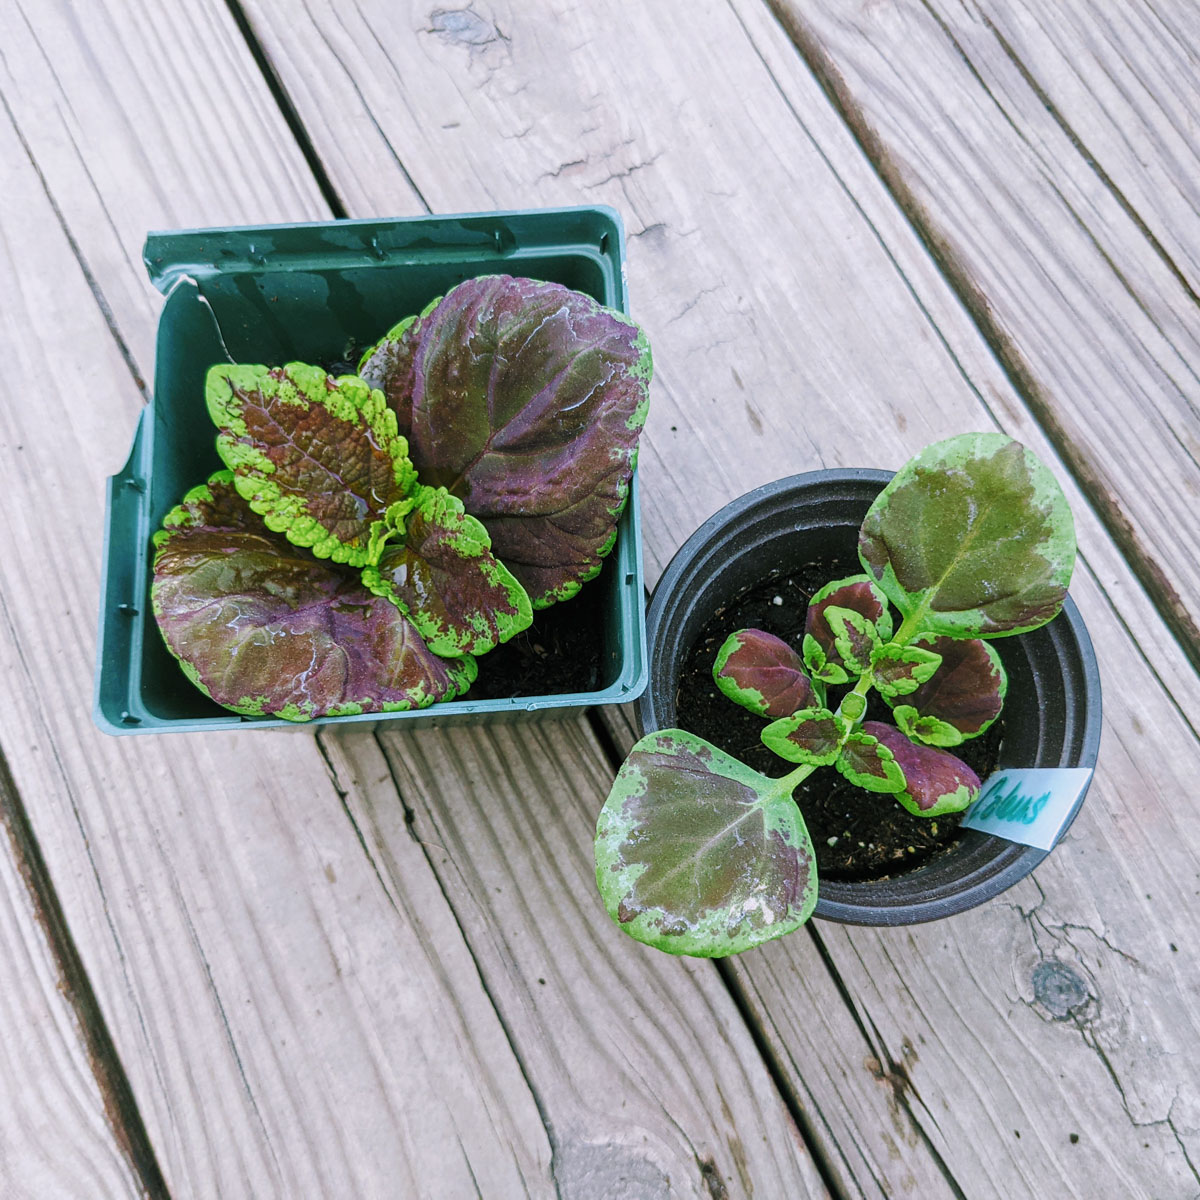 Propagating Coleus from Cuttings - Two coleus plants in small pots on the deck